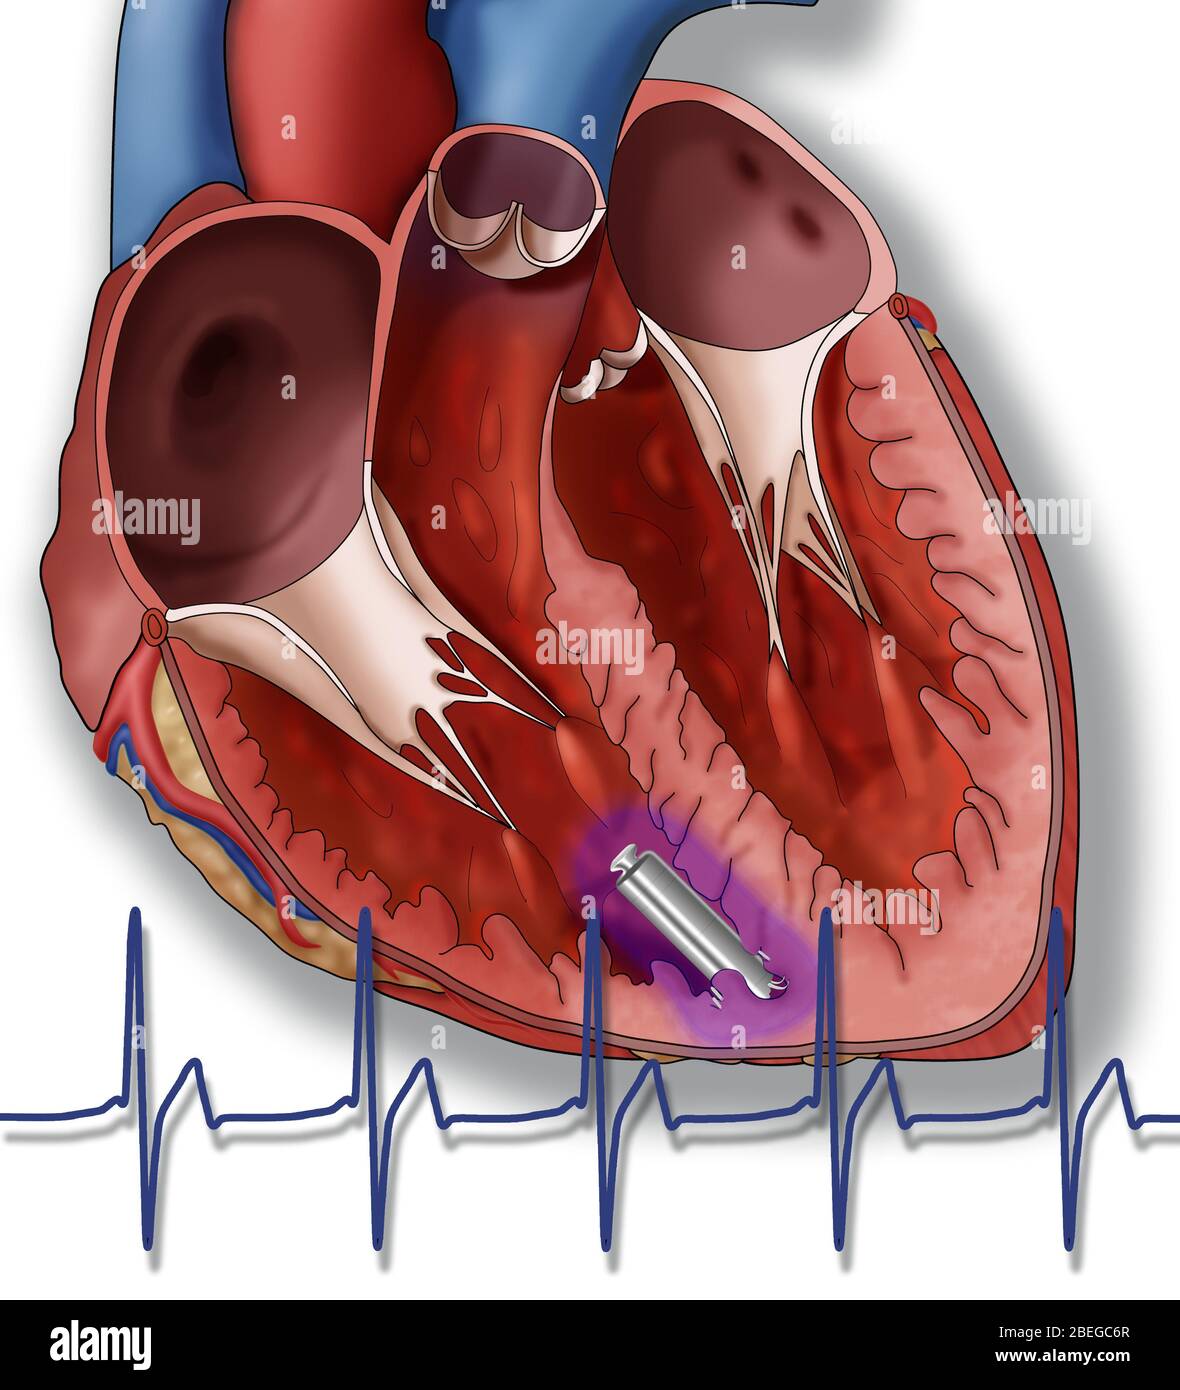 Leadless Pacemaker, Illustration Stock Photo